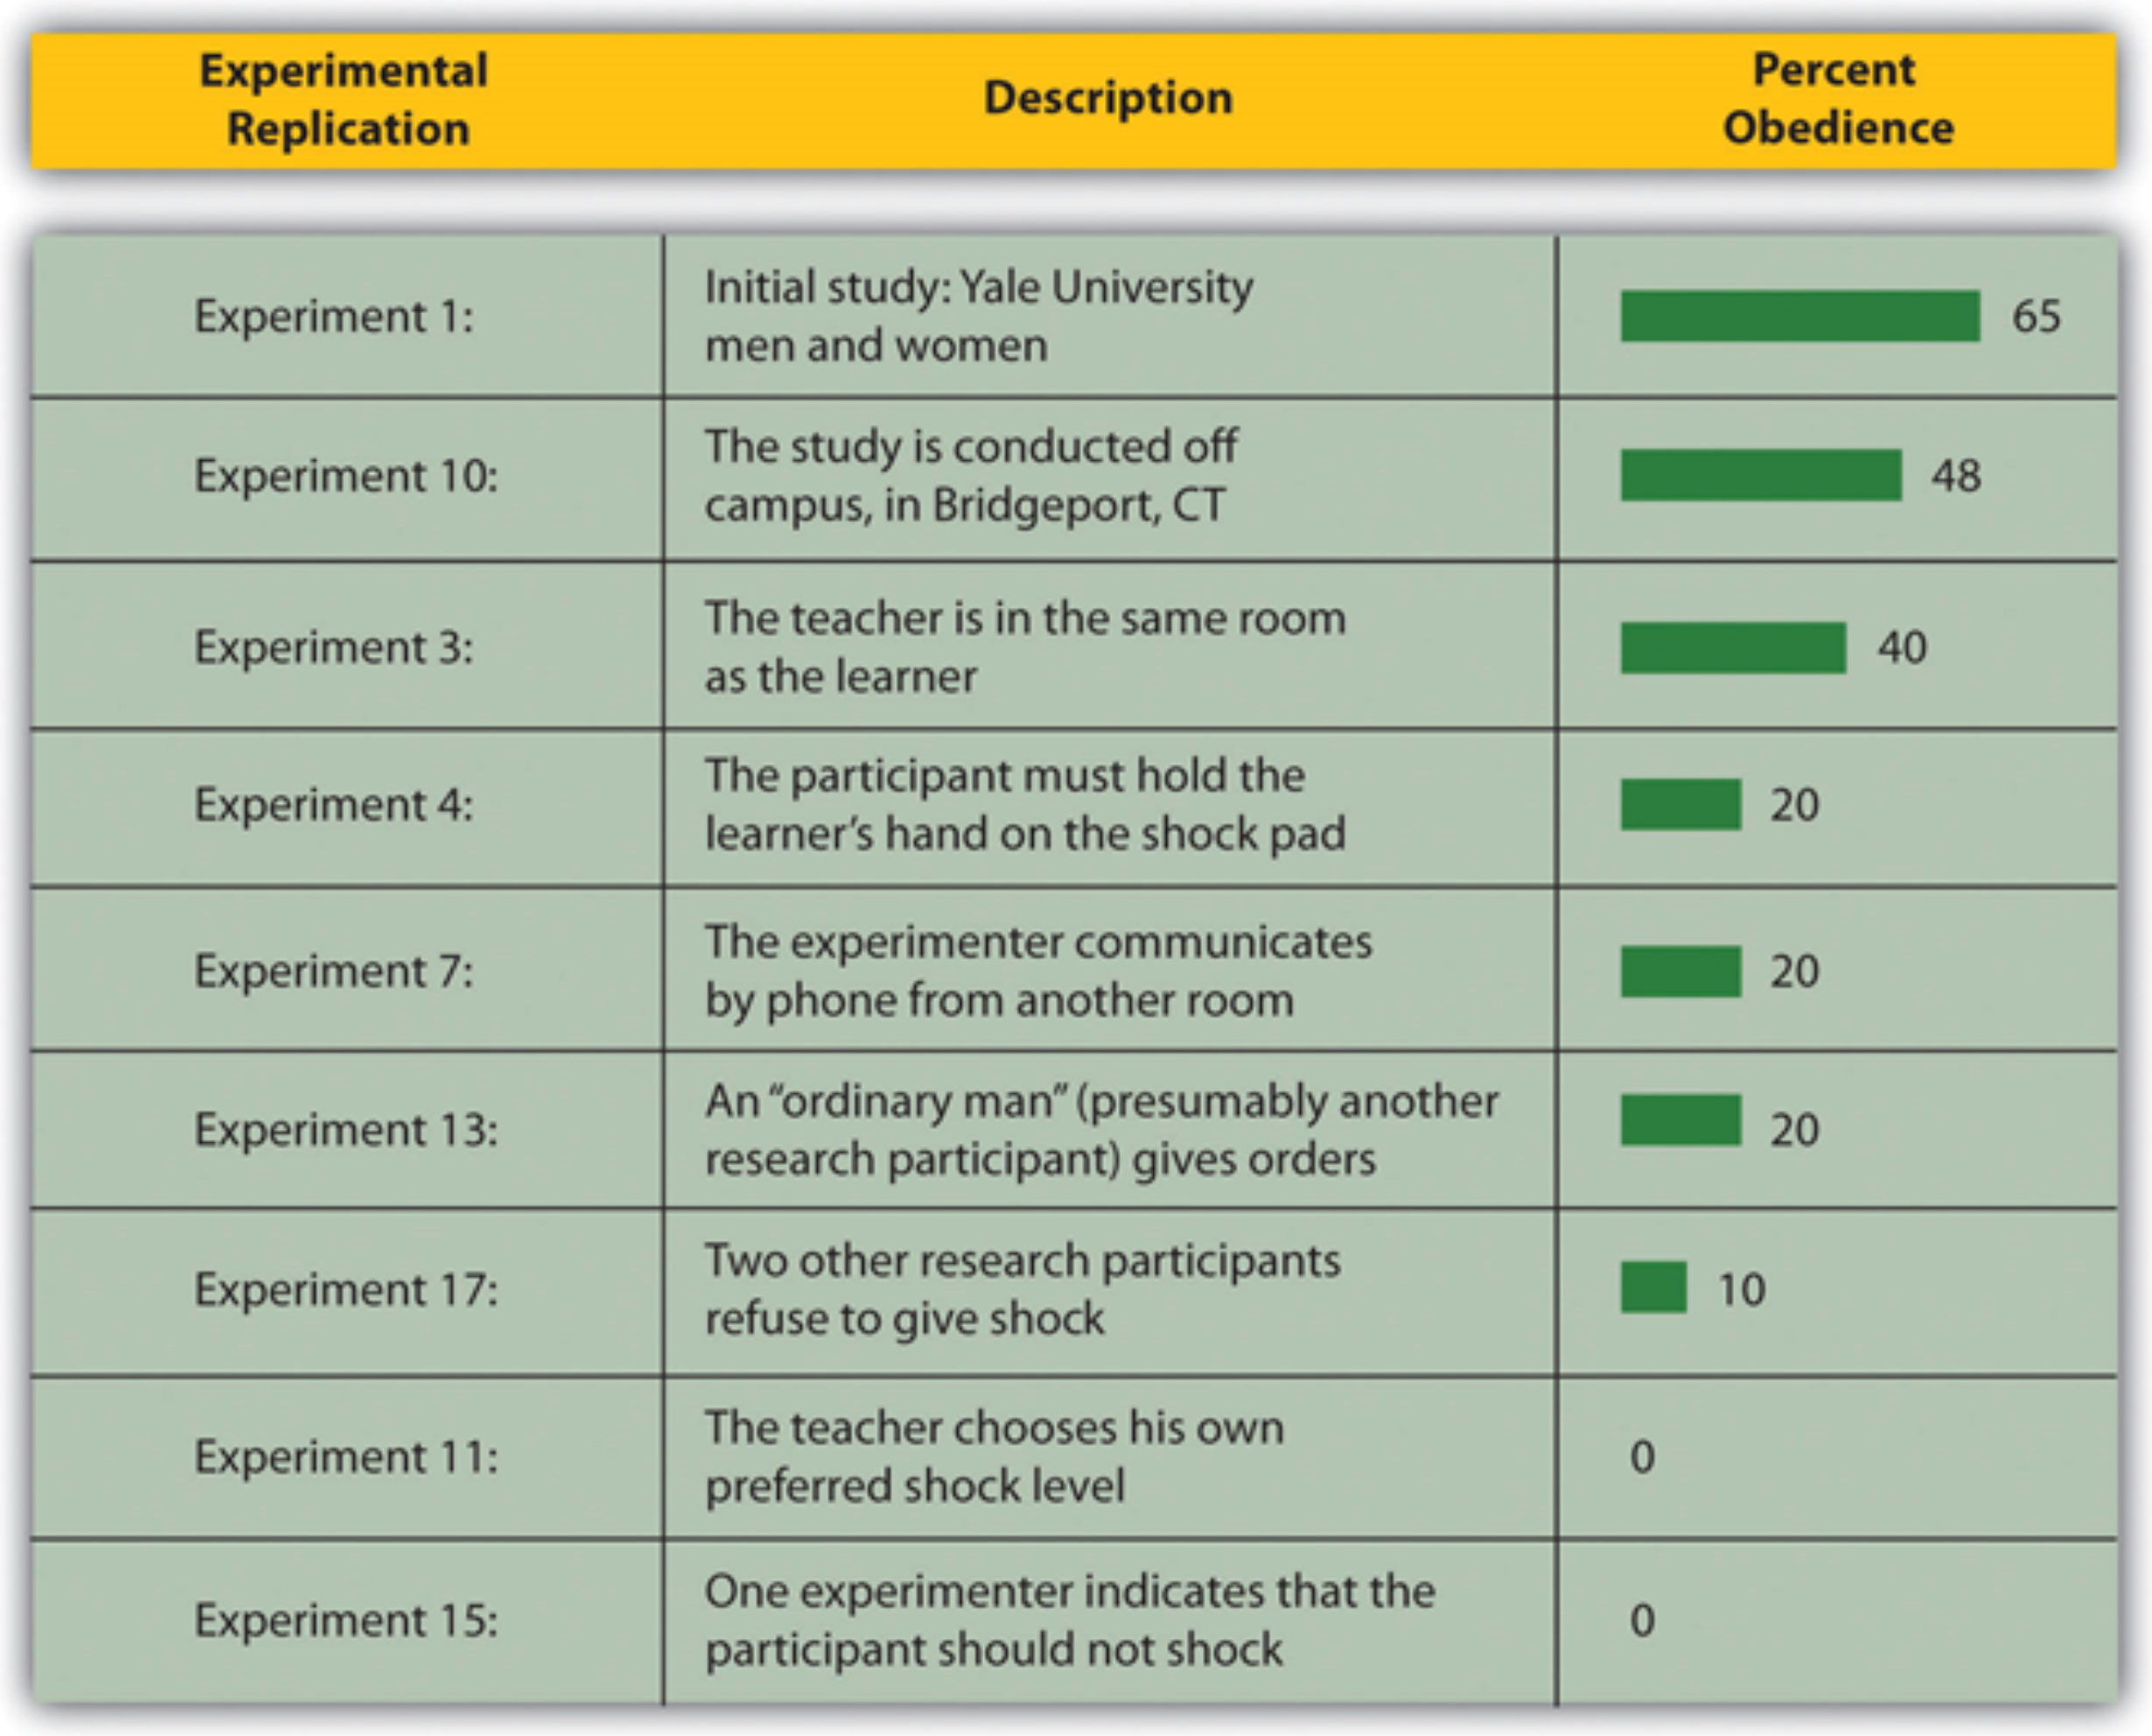 Various experimental eonditions and changes in dependent variable for Milgram's authority/obedience experiment